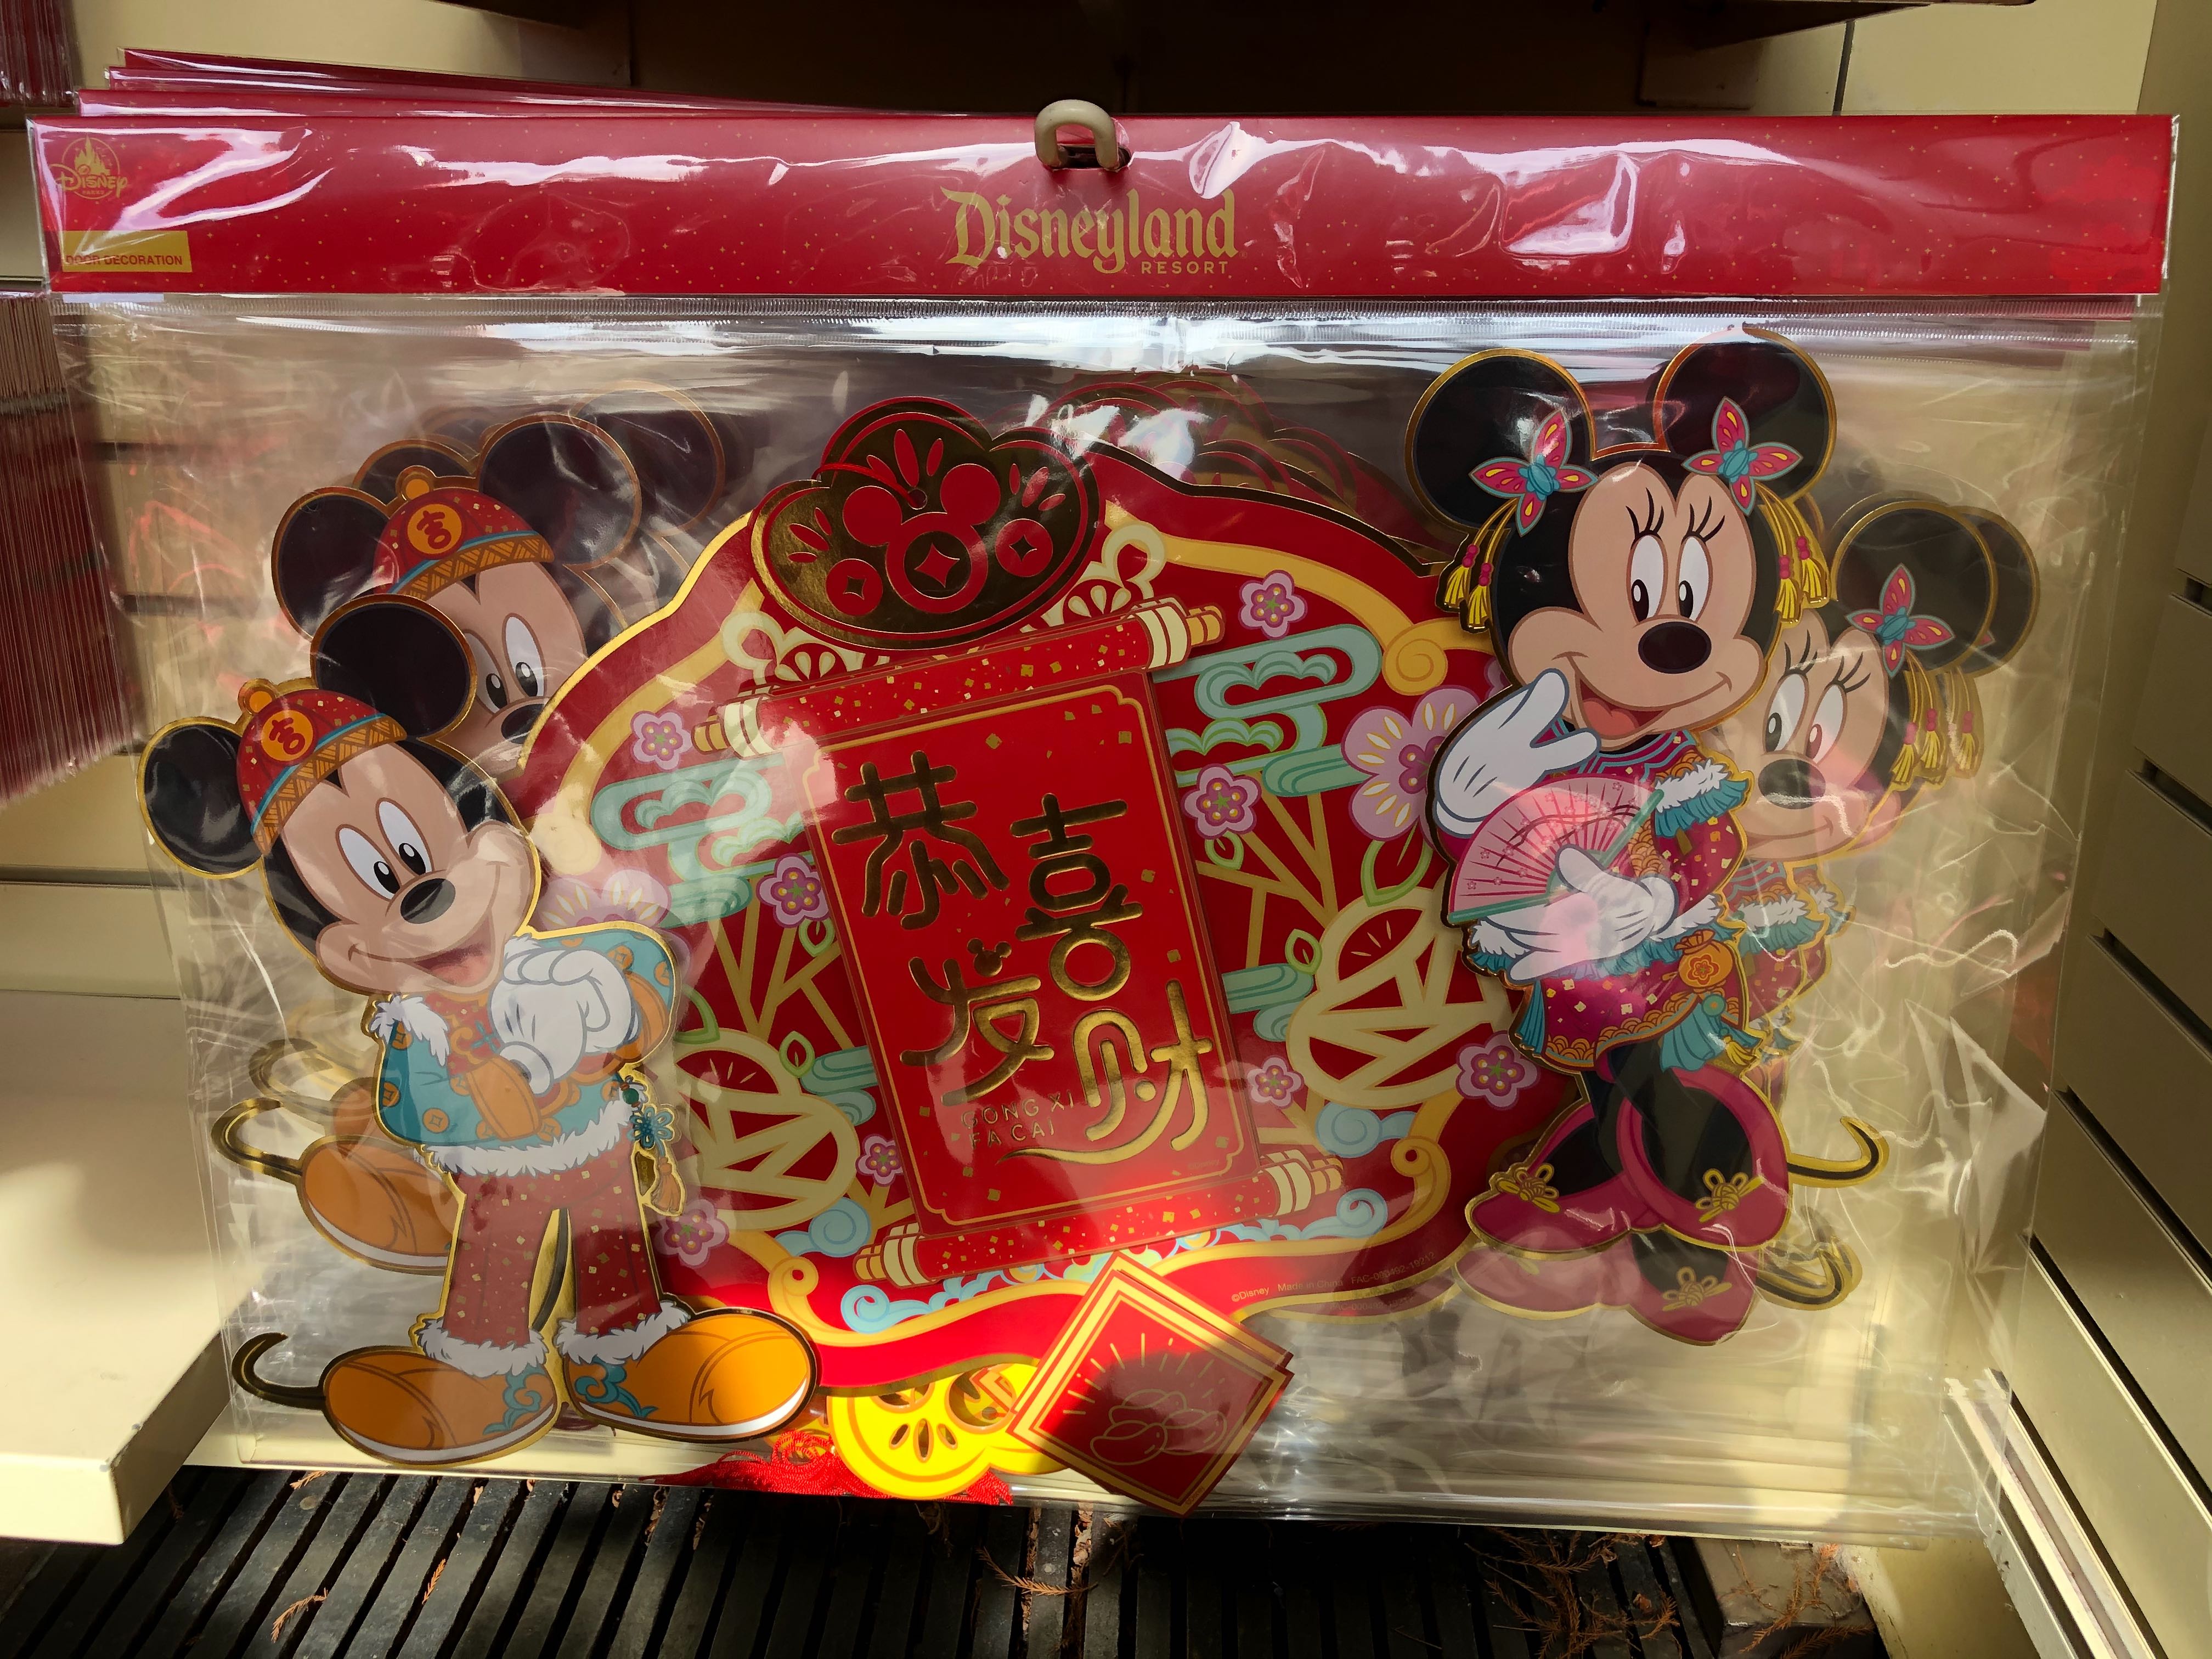 PHOTOS: Every Piece of Lunar New Year 2020 Merchandise (with Prices) at